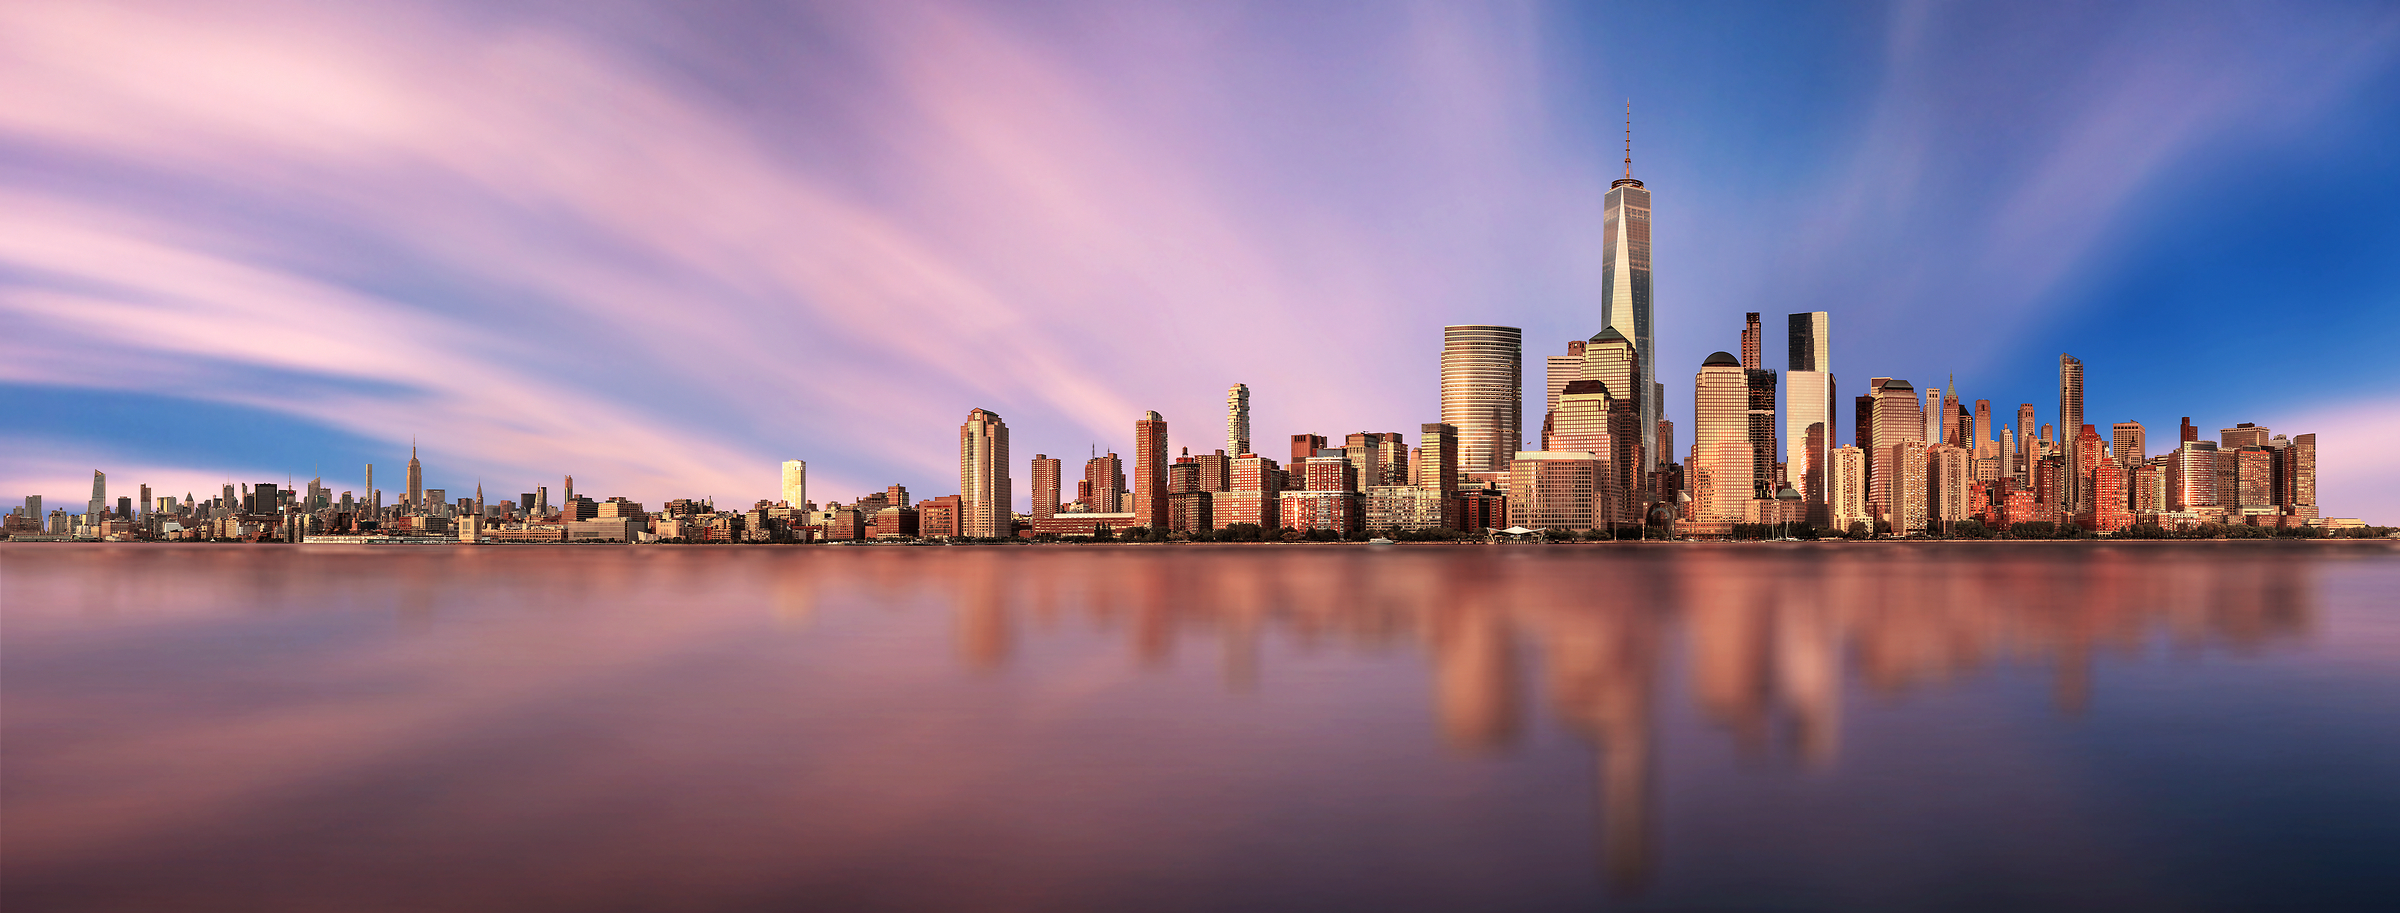 7,070 megapixels! An incredibly high resolution gigapanorama photo of sunset and the New York City skyline; cityscape fine art print created by Chris Collacott in Manhattan, NYC